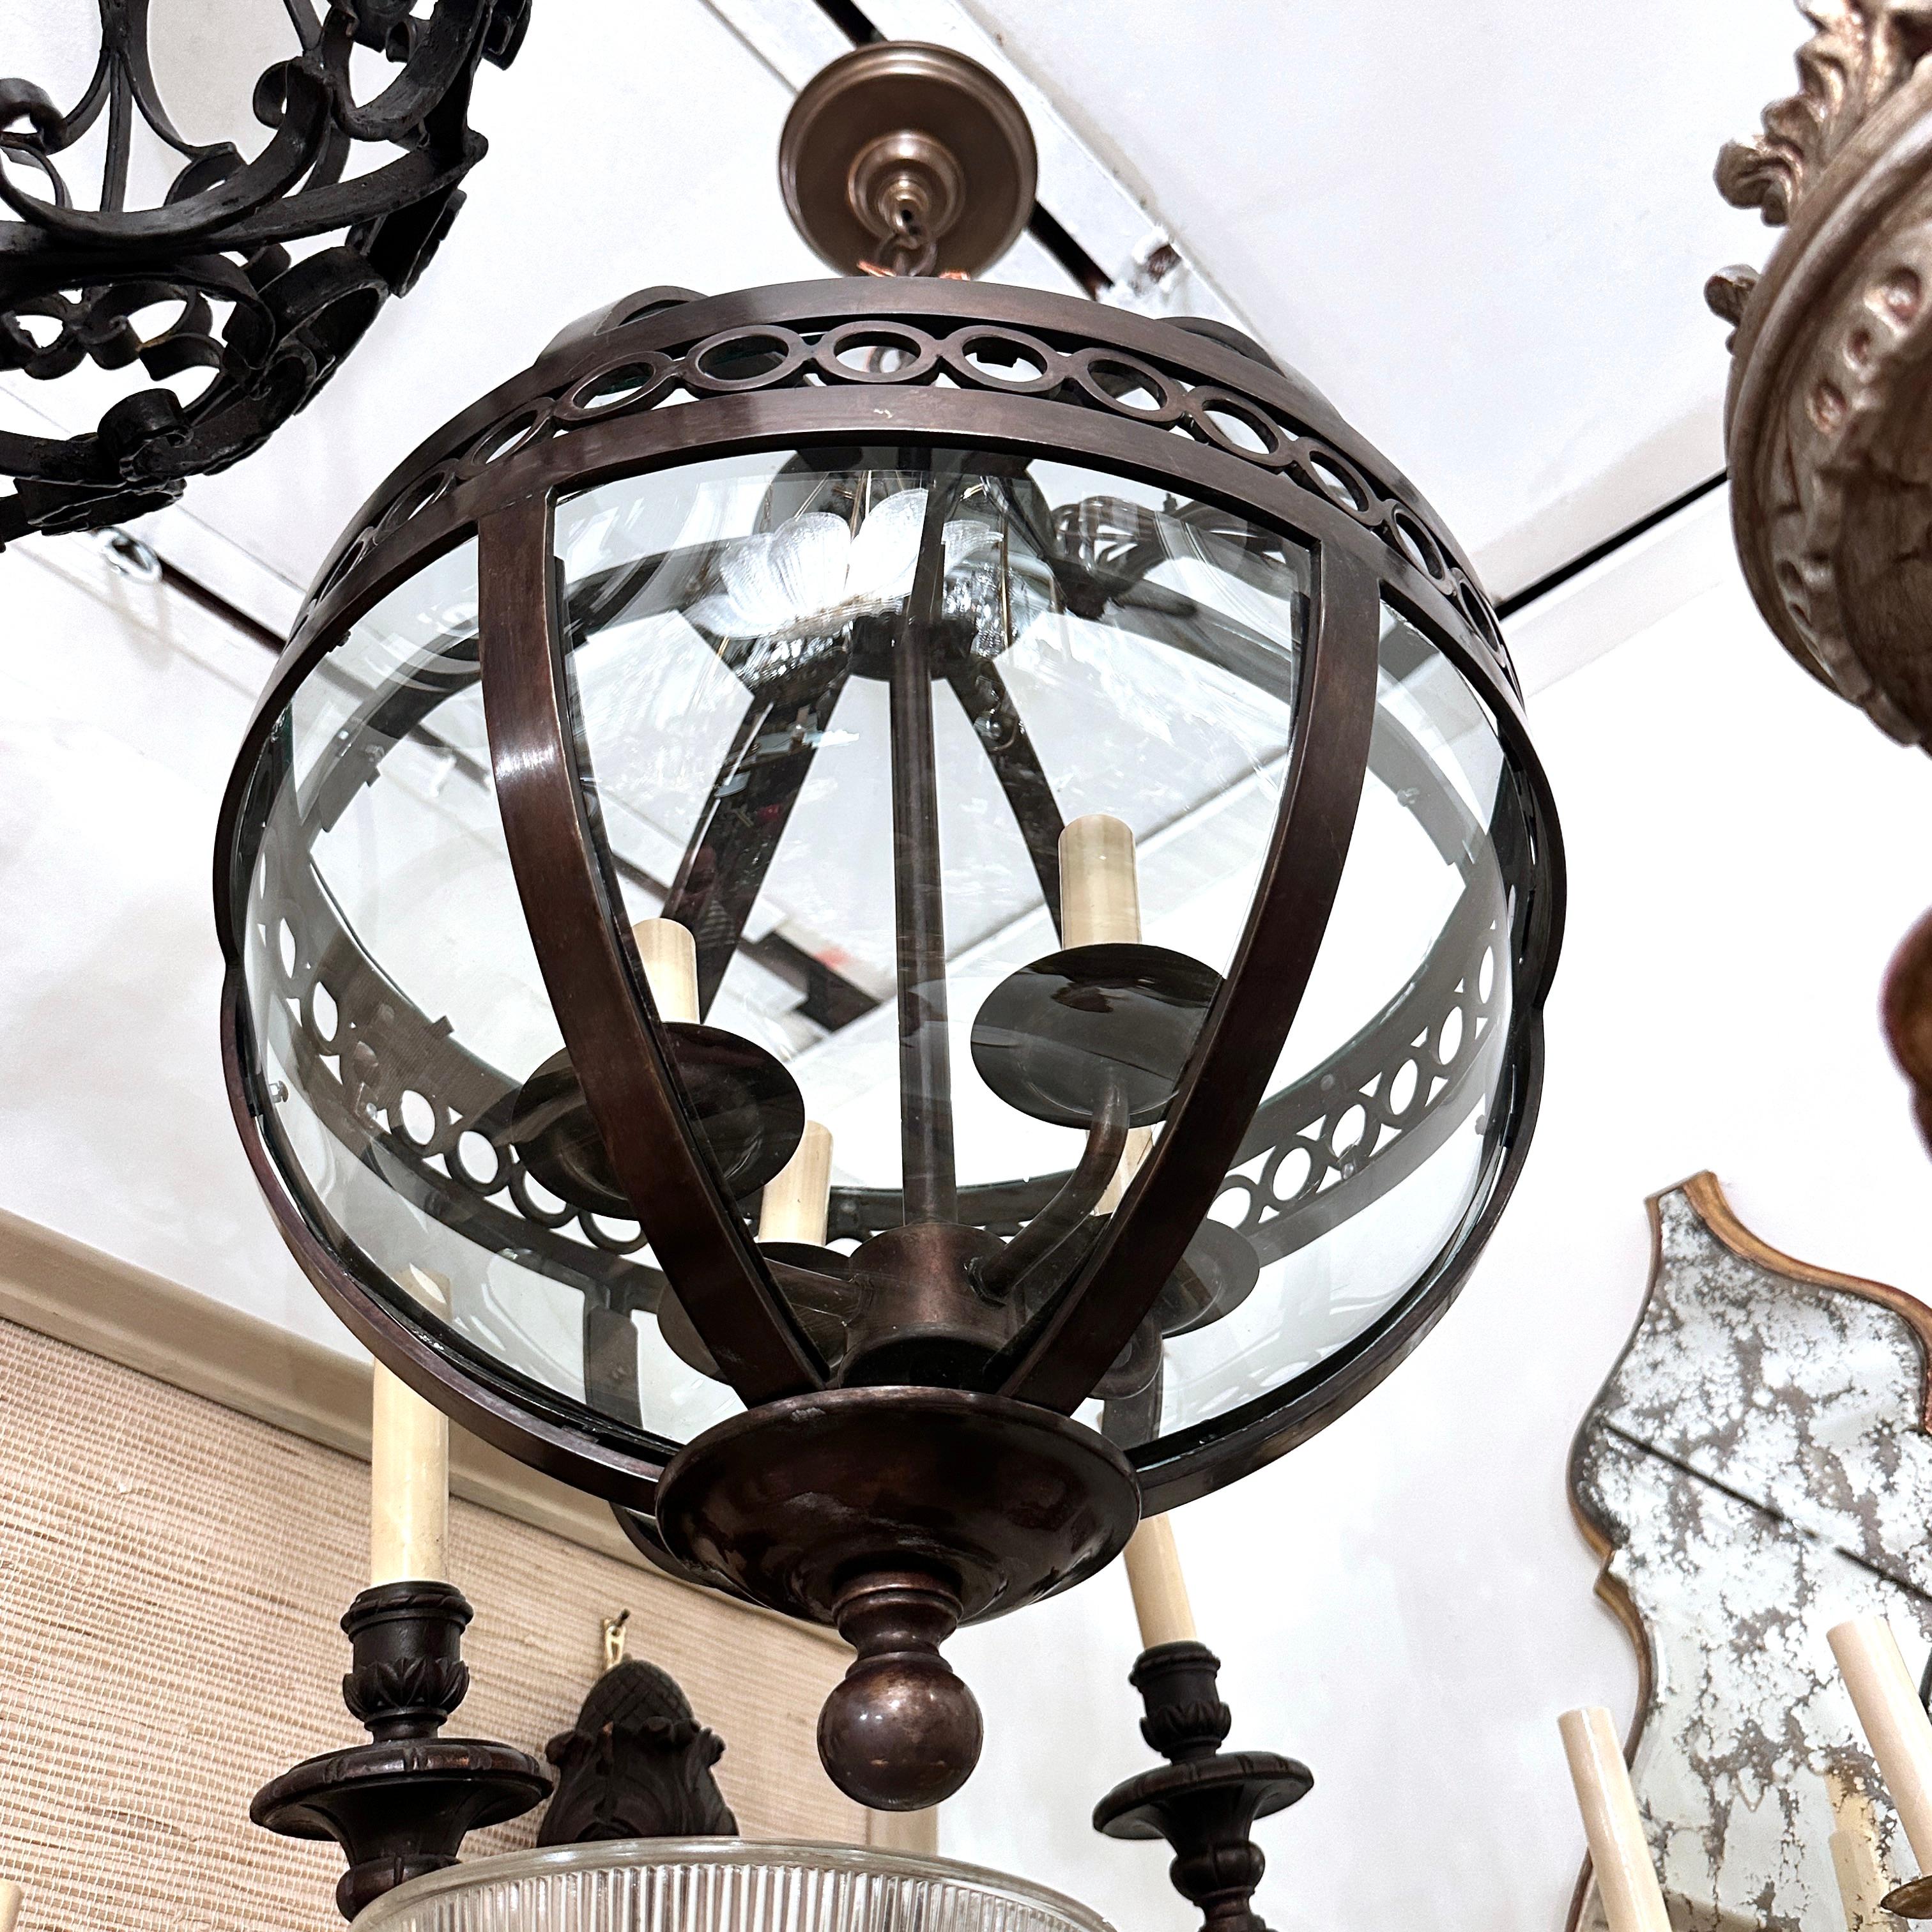 A set of circa 1950’s French bronze lanterns with 6 interior lights. Sold individually.

Measurements:
Current drop: 30